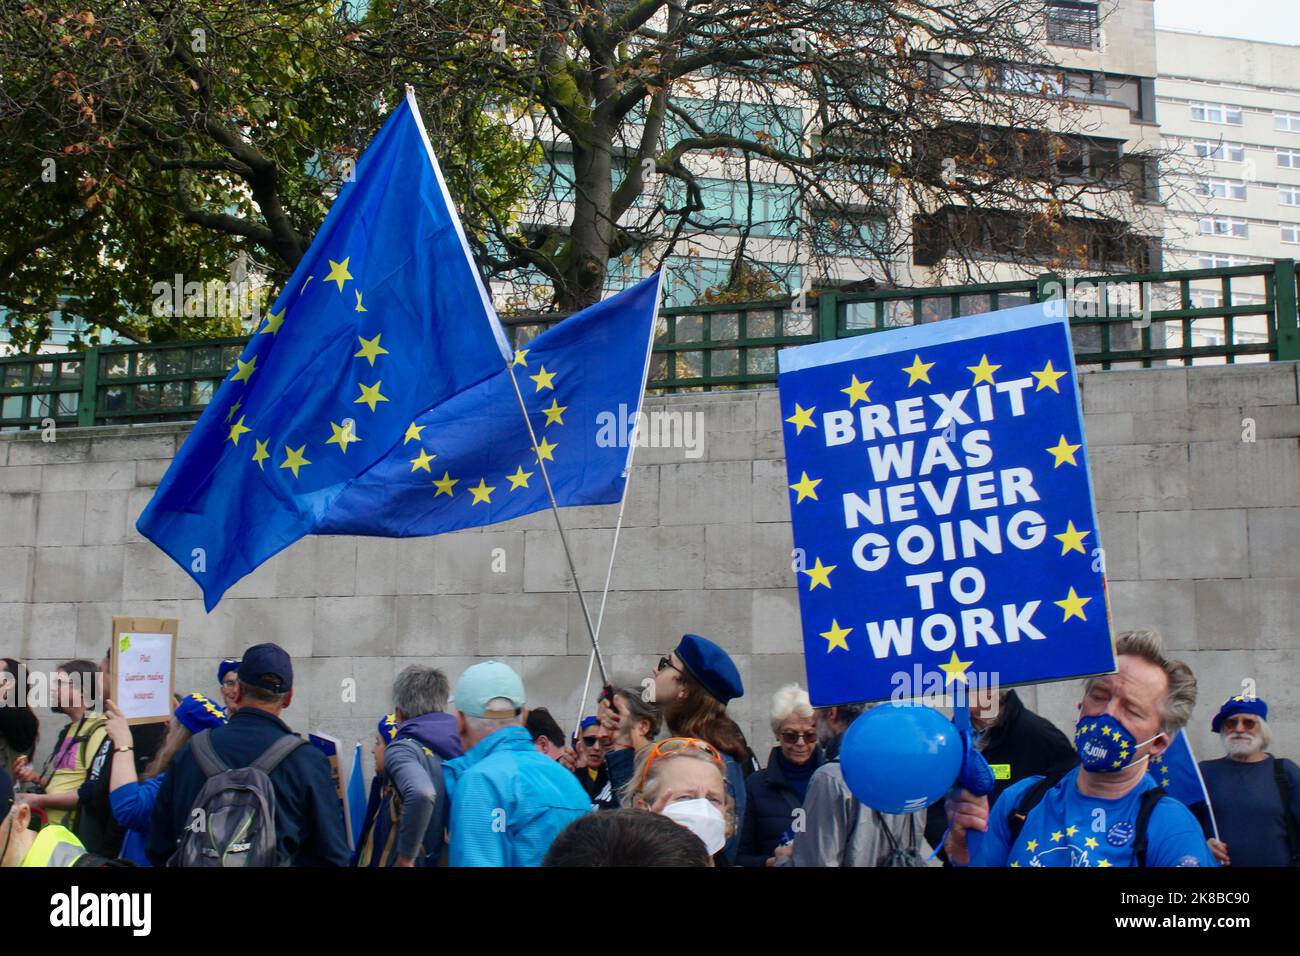 the first ever national rejoin the european union march in central london england UK 22nd october 2022 Stock Photo